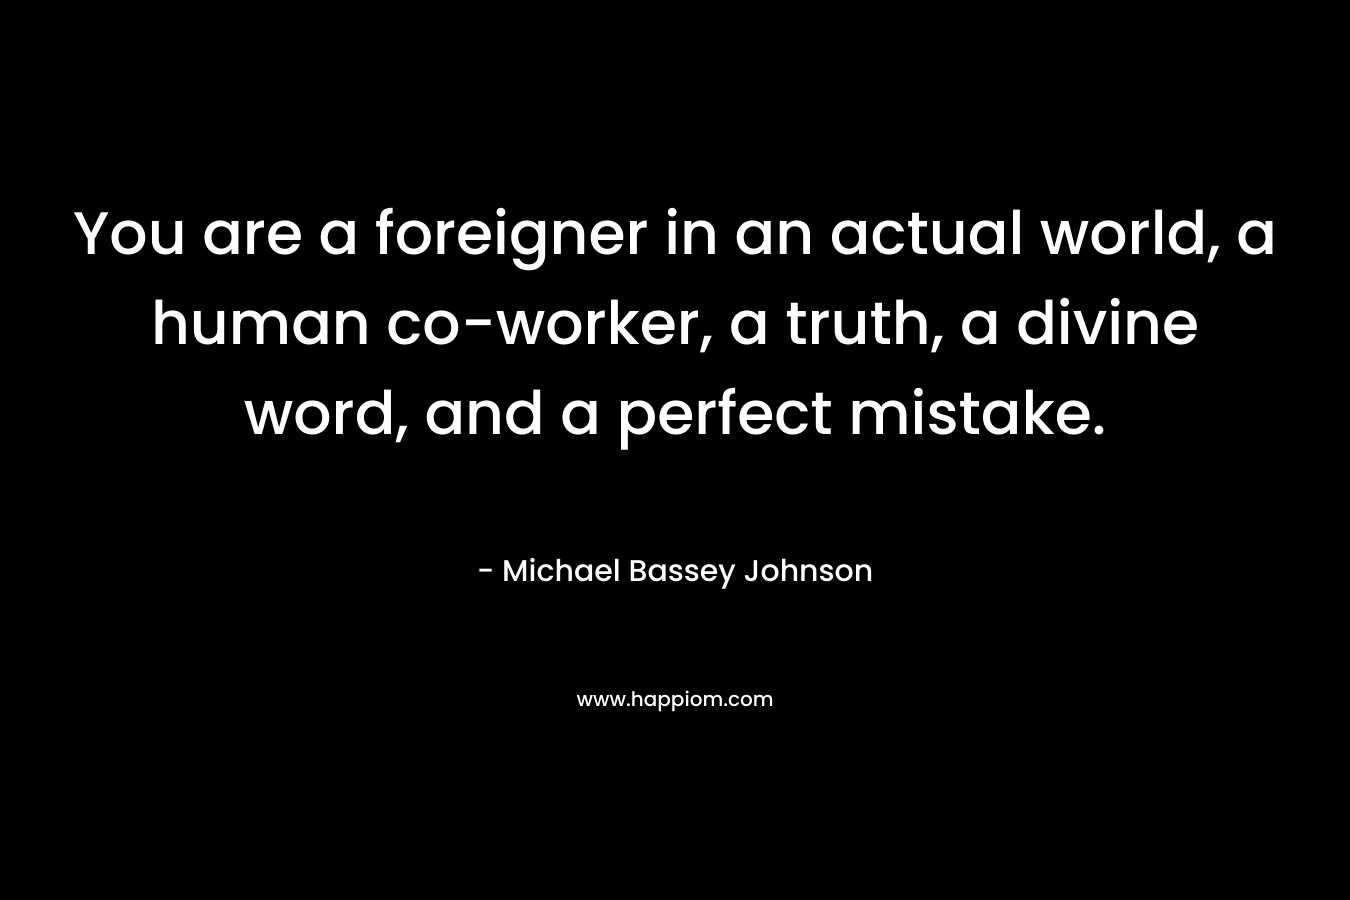 You are a foreigner in an actual world, a human co-worker, a truth, a divine word, and a perfect mistake.